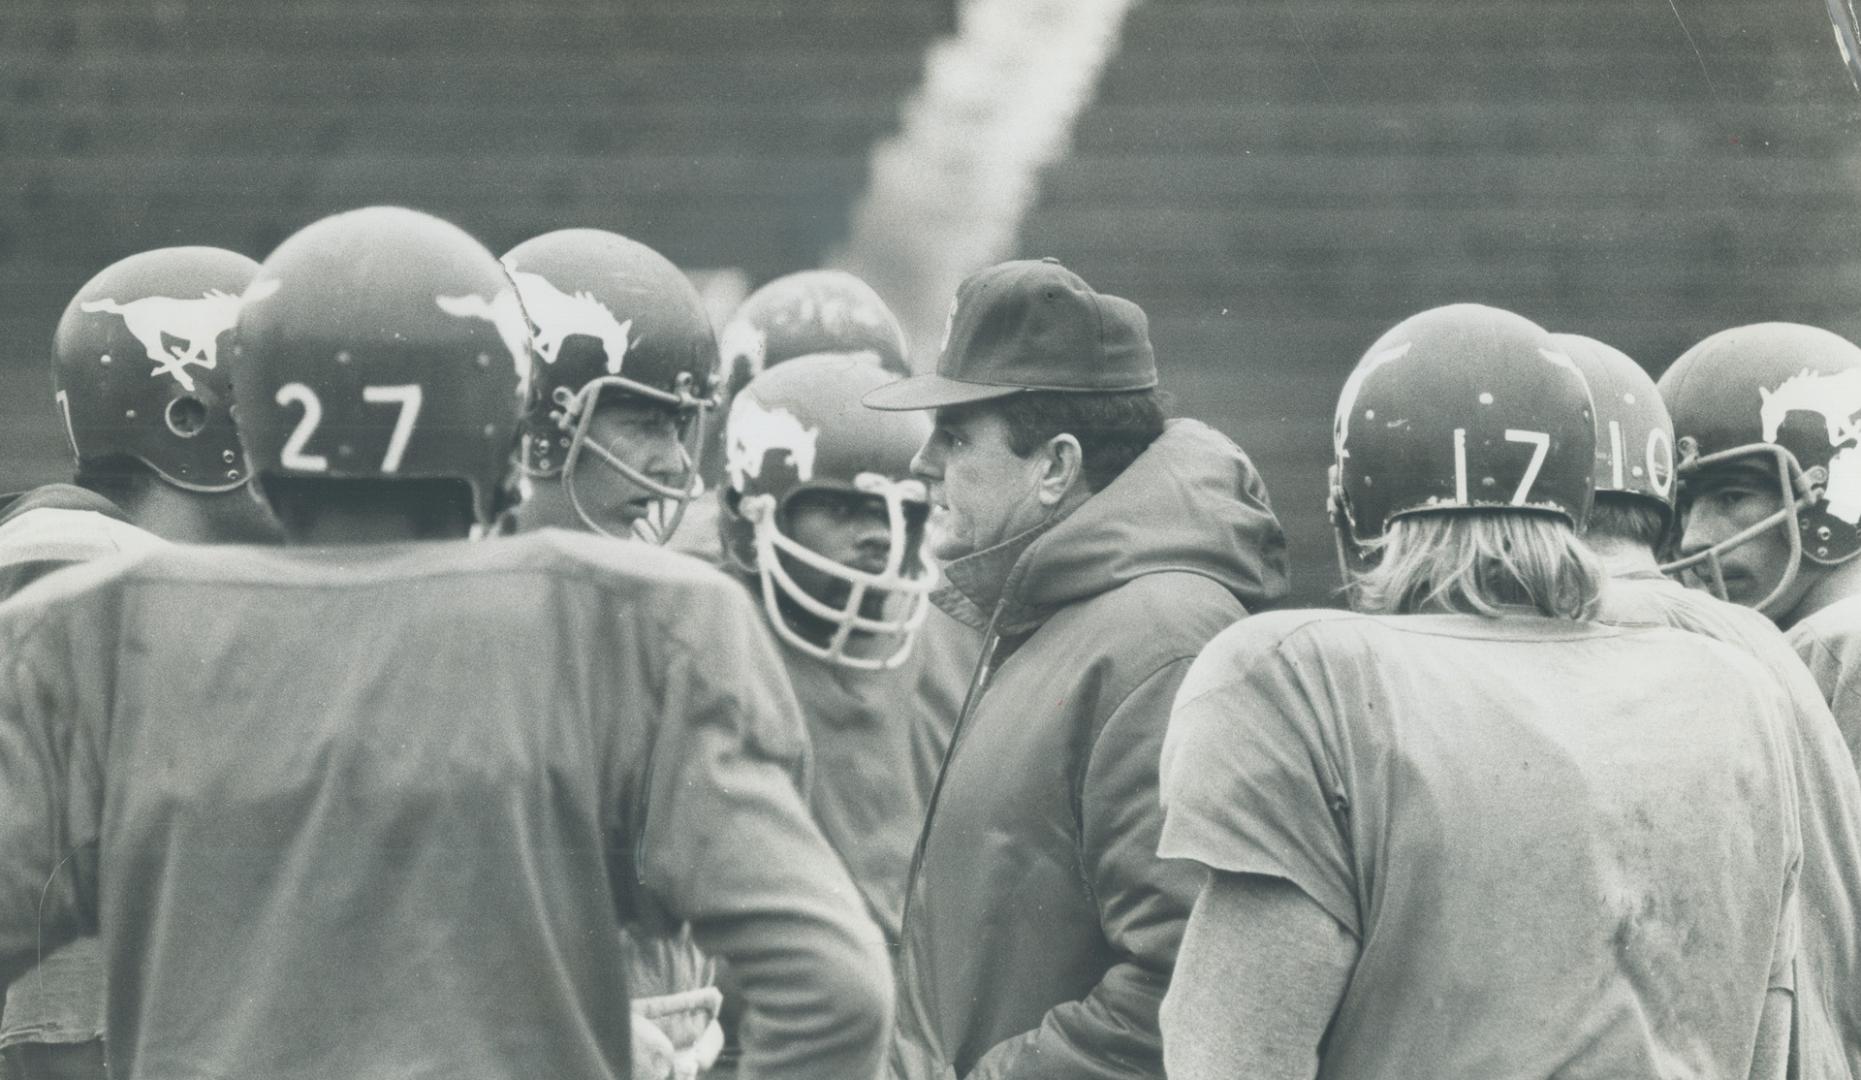 Planning the strategy for today's game, Calgary Stampeders coach Jim Duncan gathered his team around him yesterday during their final workout, pinpoin(...)